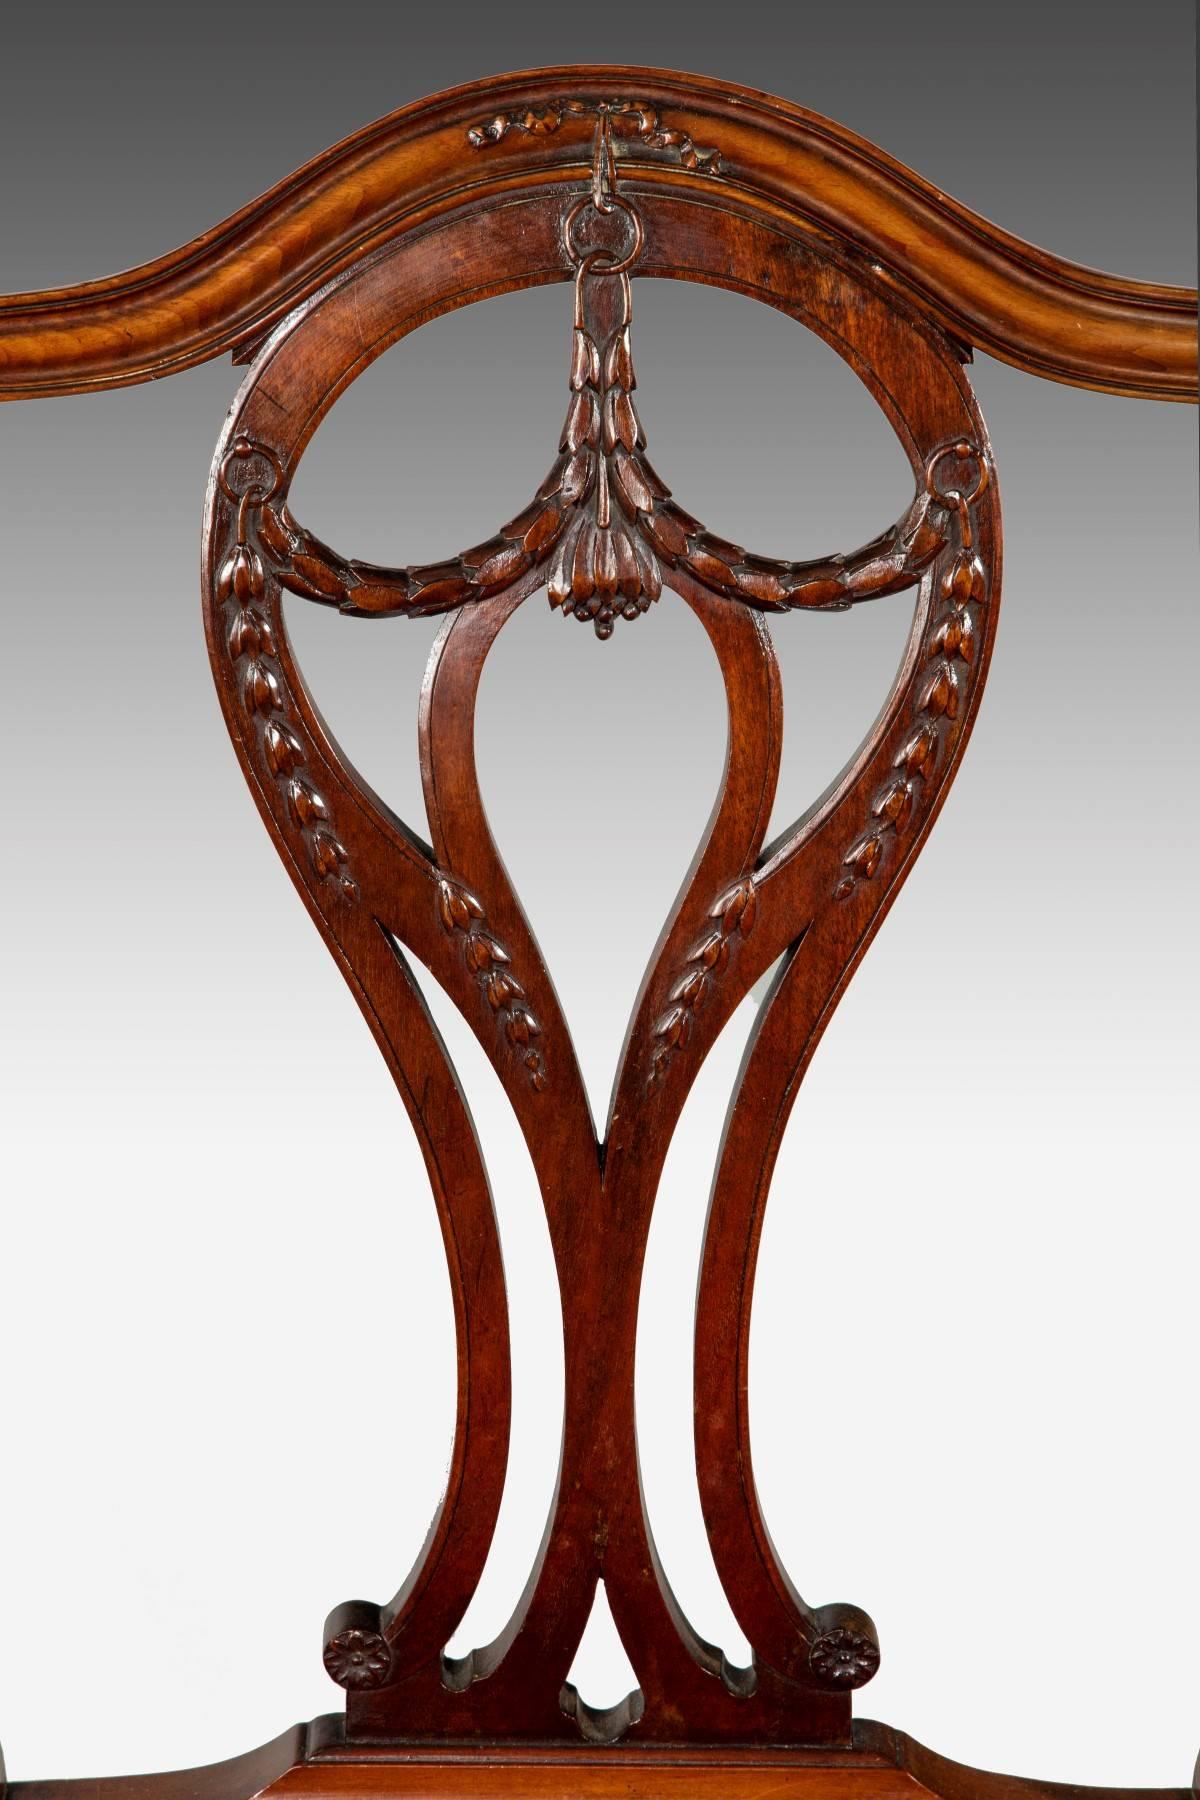 Made from Cuban mahogany, these chairs have shaped backs with a central pierced splat that is decorated with good carved decoration. The stuff over upholstered seats with a serpentine front rail and the front legs have an unusual splay at the